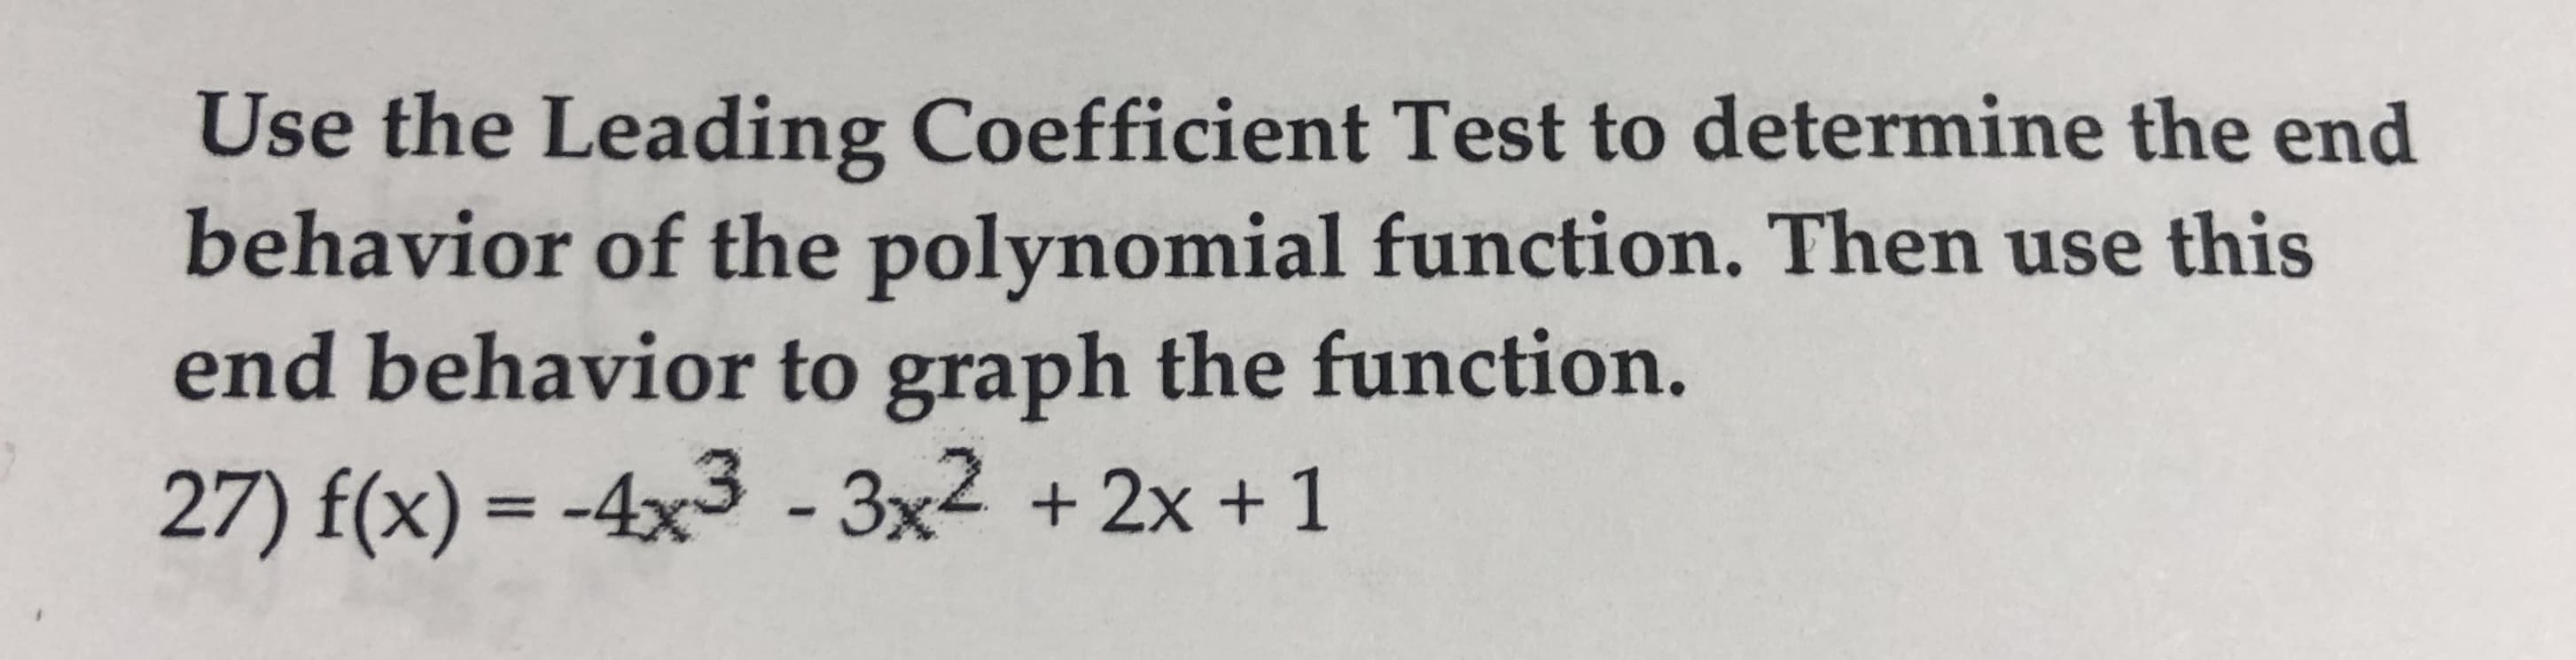 Use the Leading Coefficient Test to determine the end
behavior of the polynomial function. Then use this
end behavior to graph the function.
27) f(x)- -4x3 -3x2 +2x + 1
